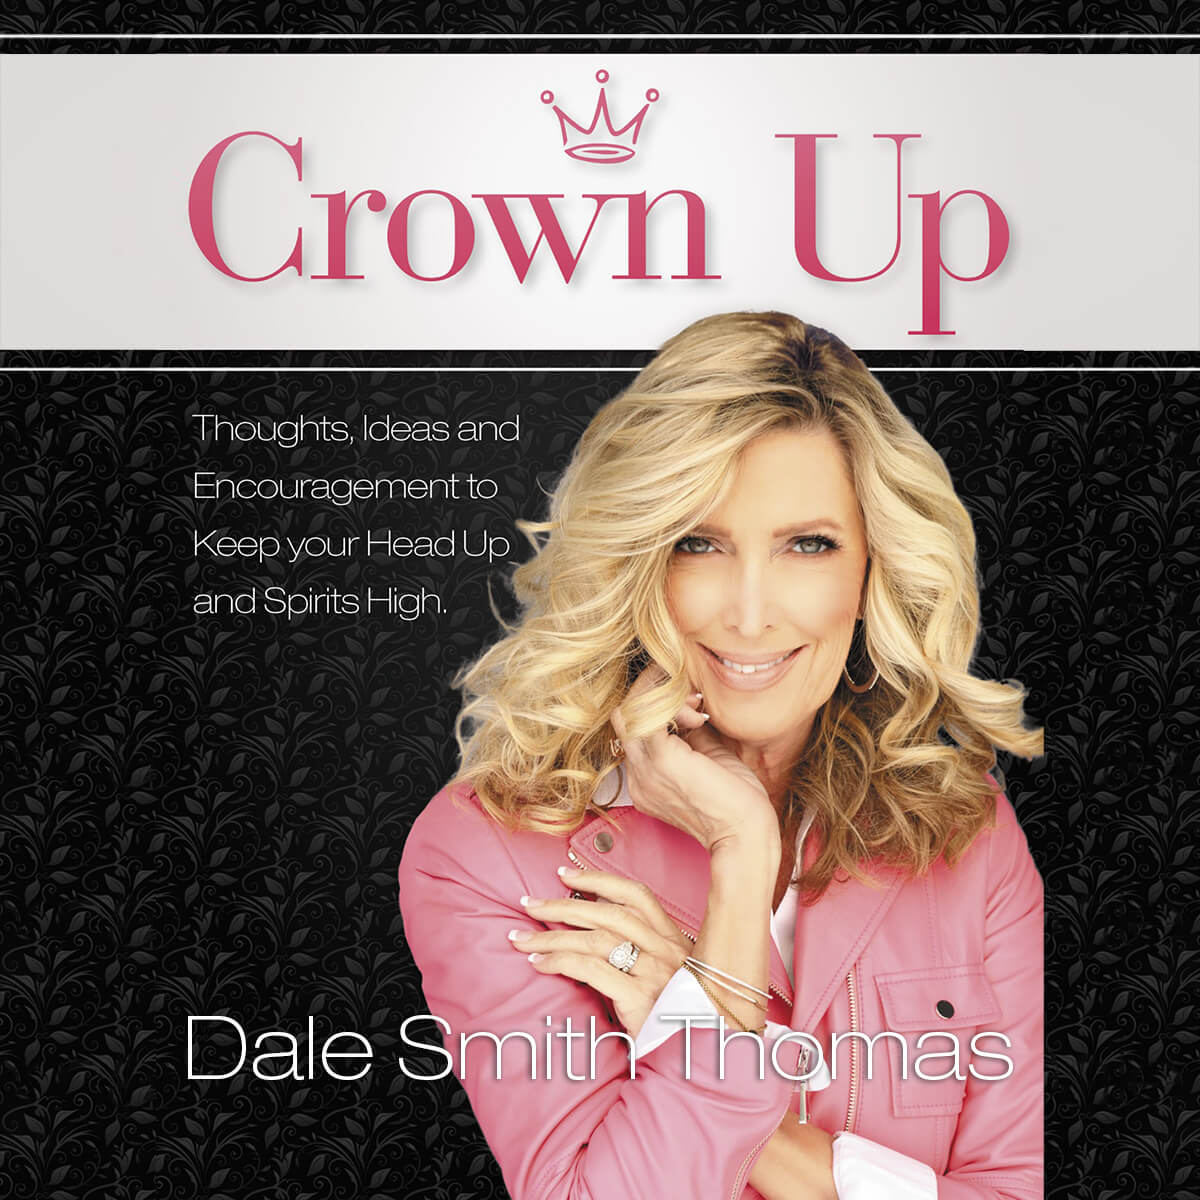 Crown Up - Dale Smith Thomas